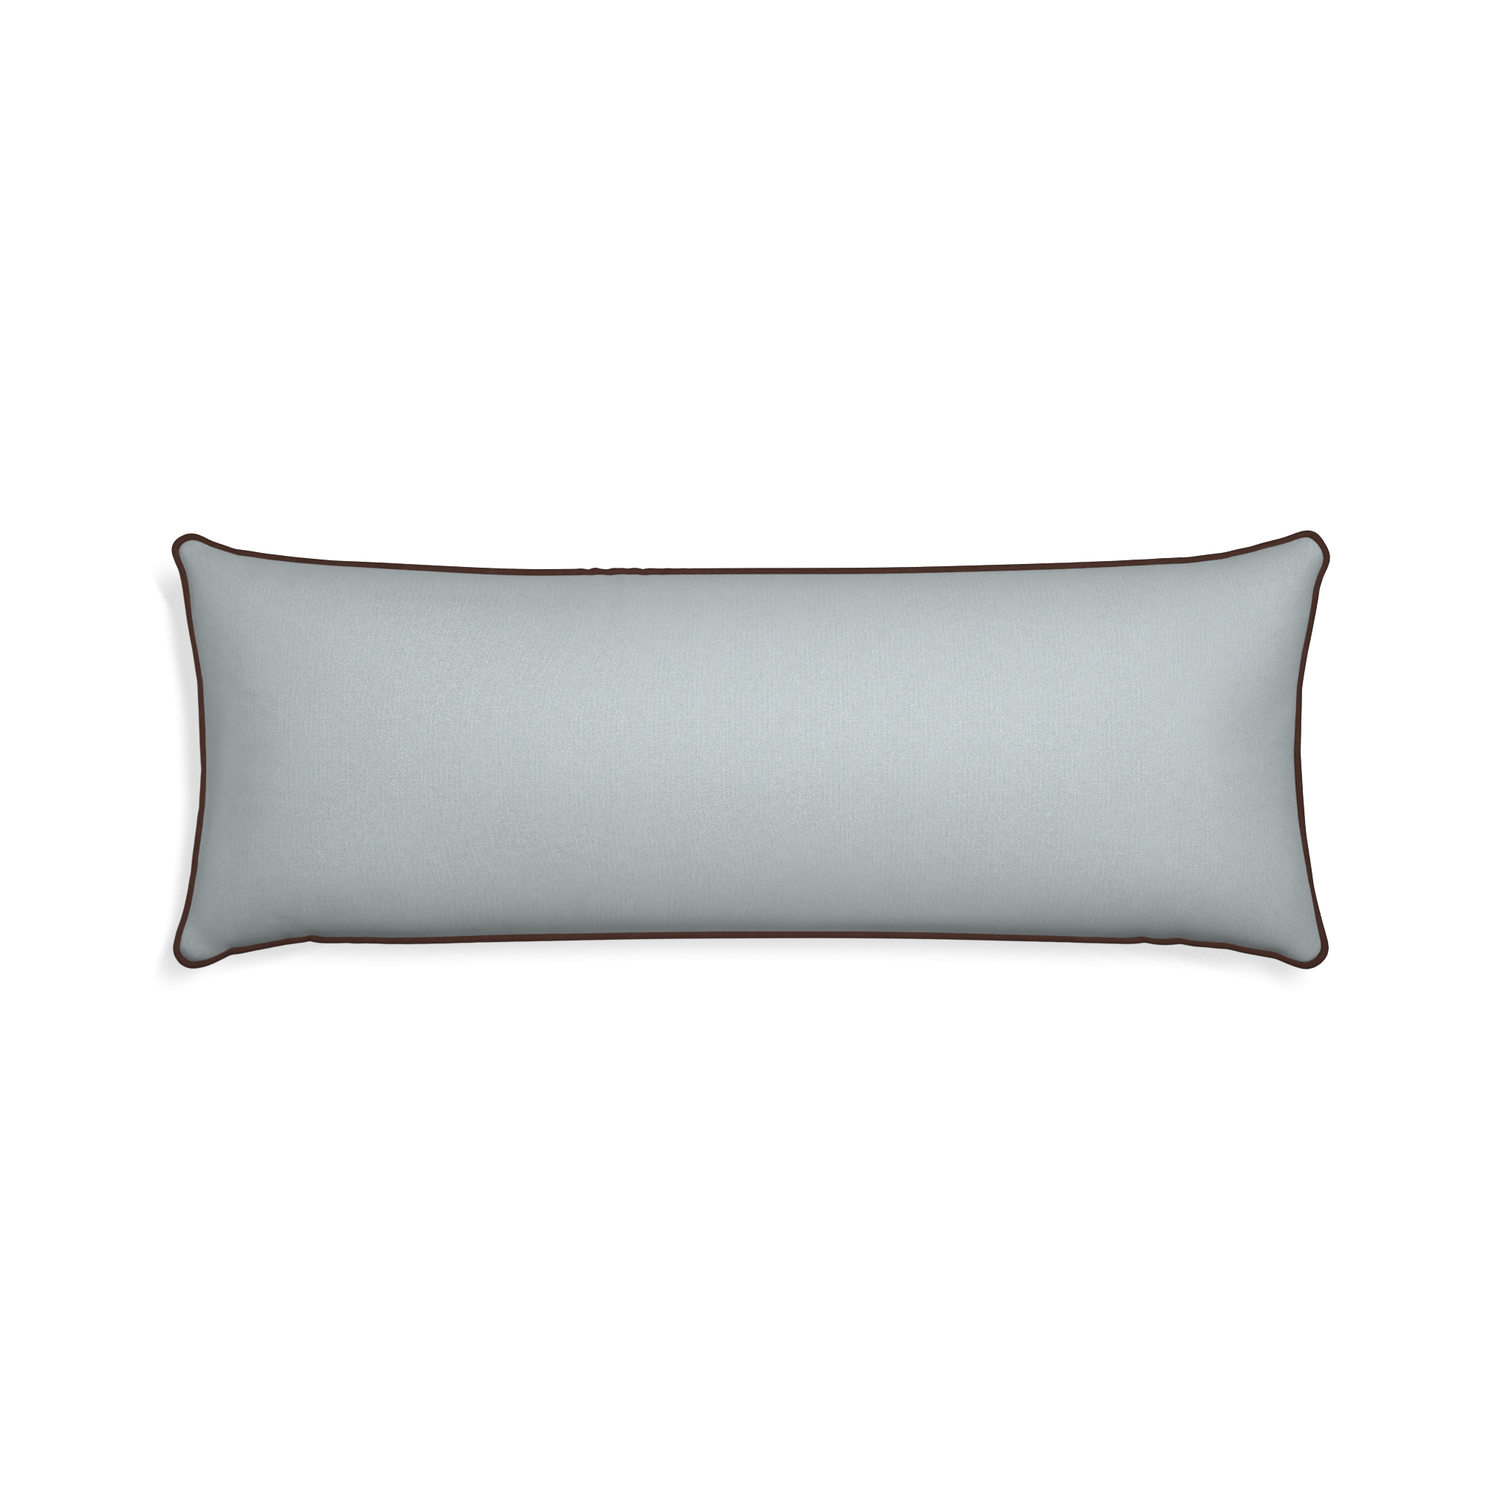 Xl-lumbar sea custom grey bluepillow with w piping on white background